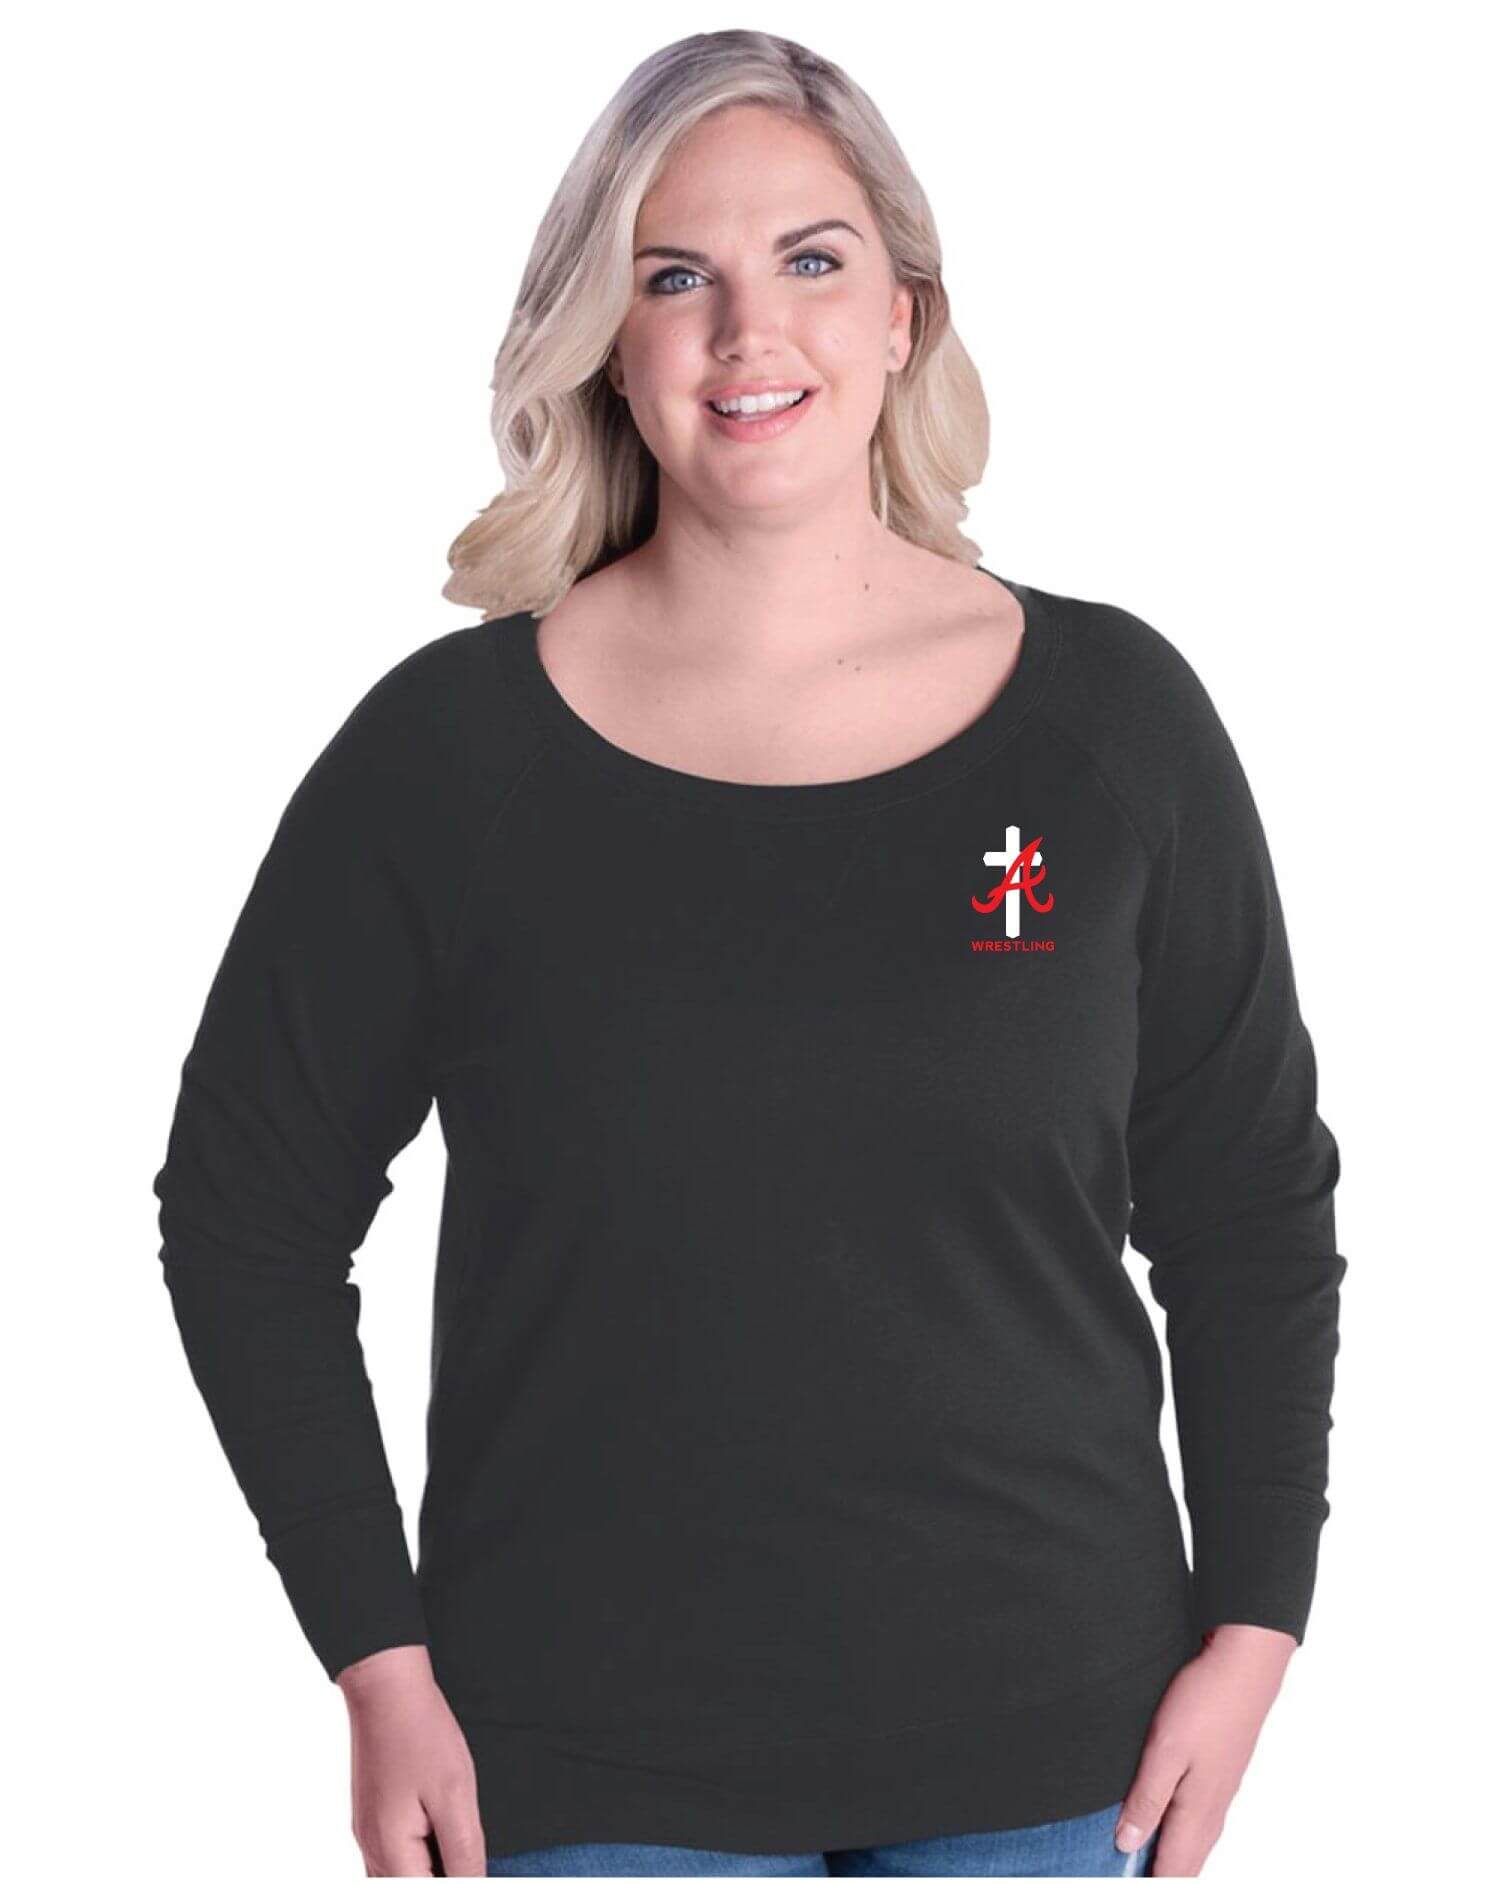 Assumption Wrestling LAT Women's Curvy Slouchy Pullover